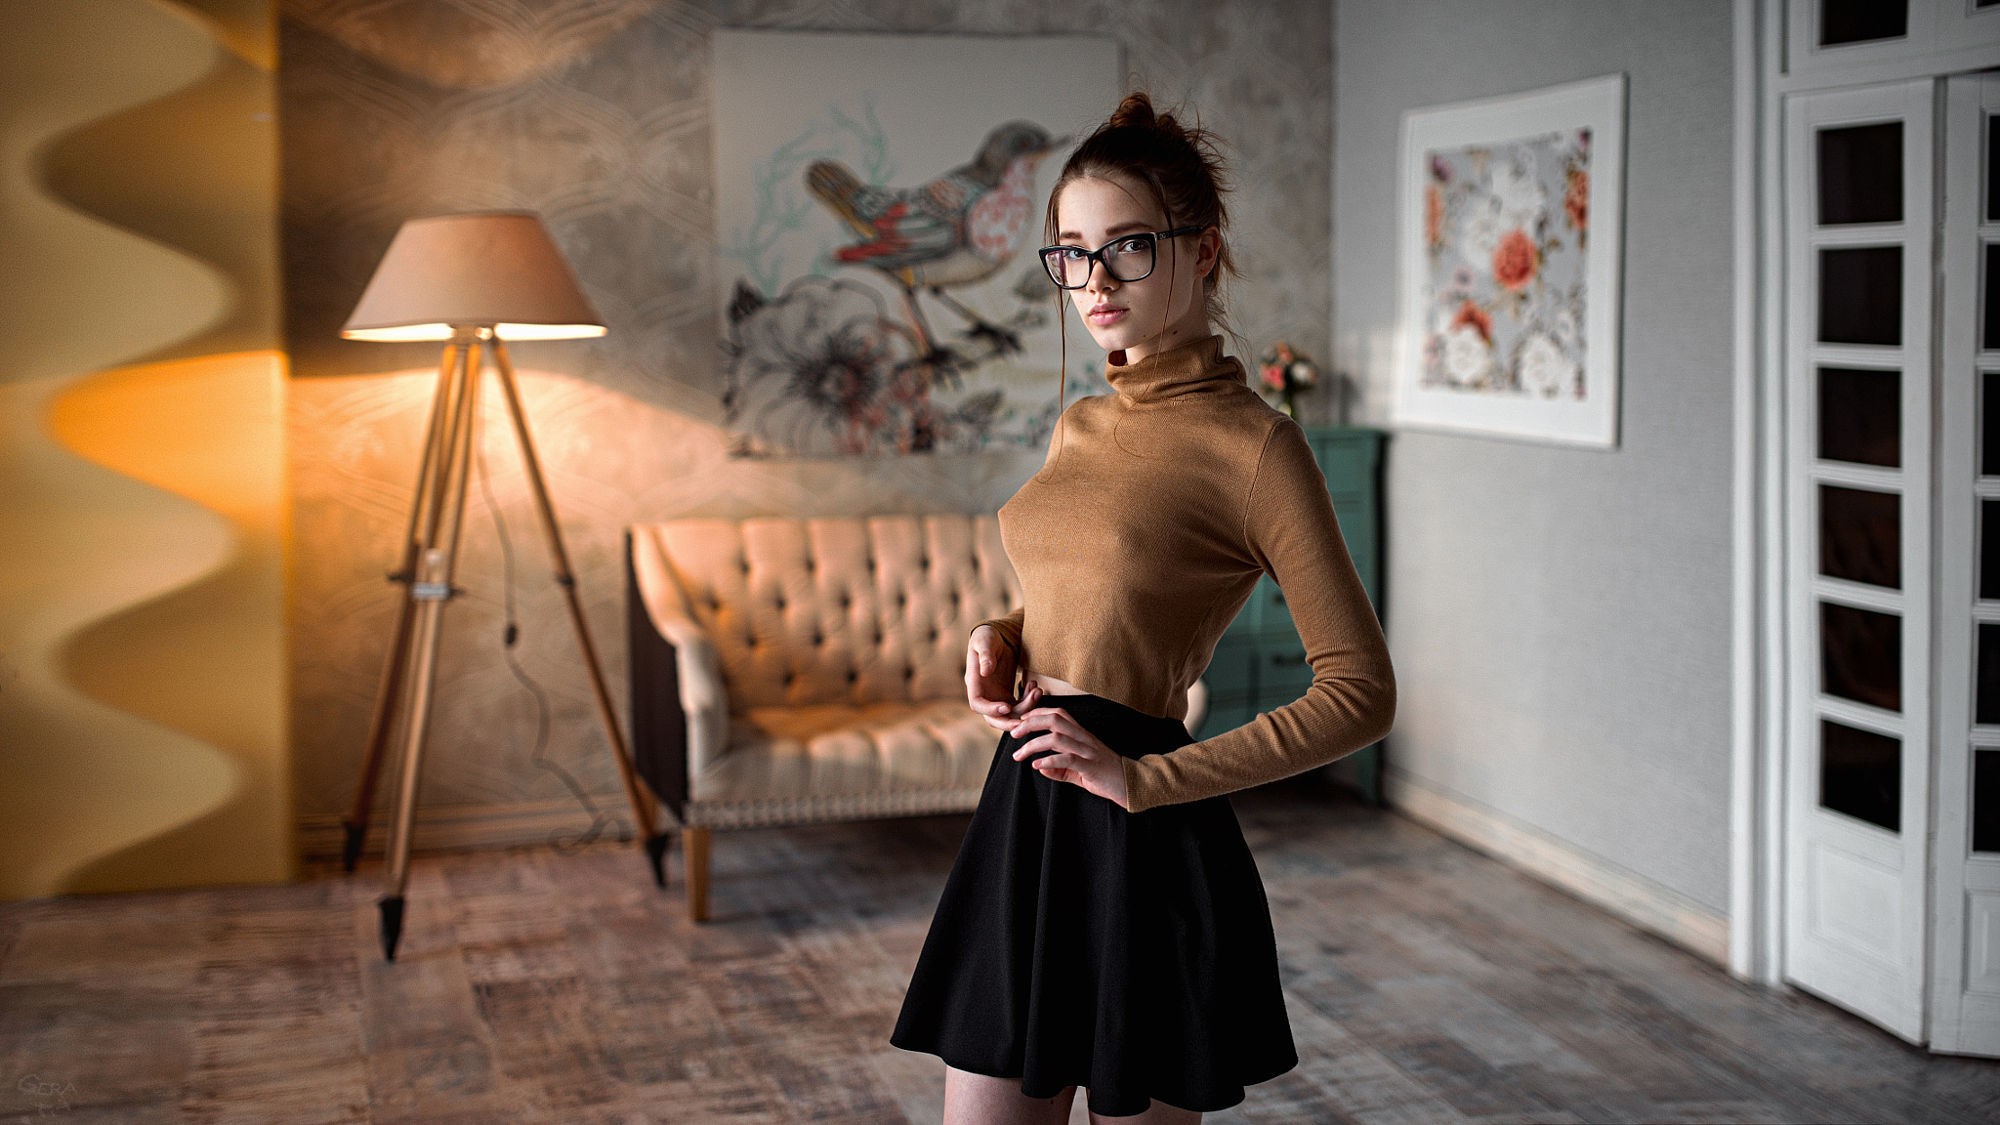 People 2000x1125 nipples through clothing women interior model women with glasses skirt see-through clothing Georgy Chernyadyev Anna Dyuzhina glasses nipple bulge women indoors indoors standing looking at viewer lamp